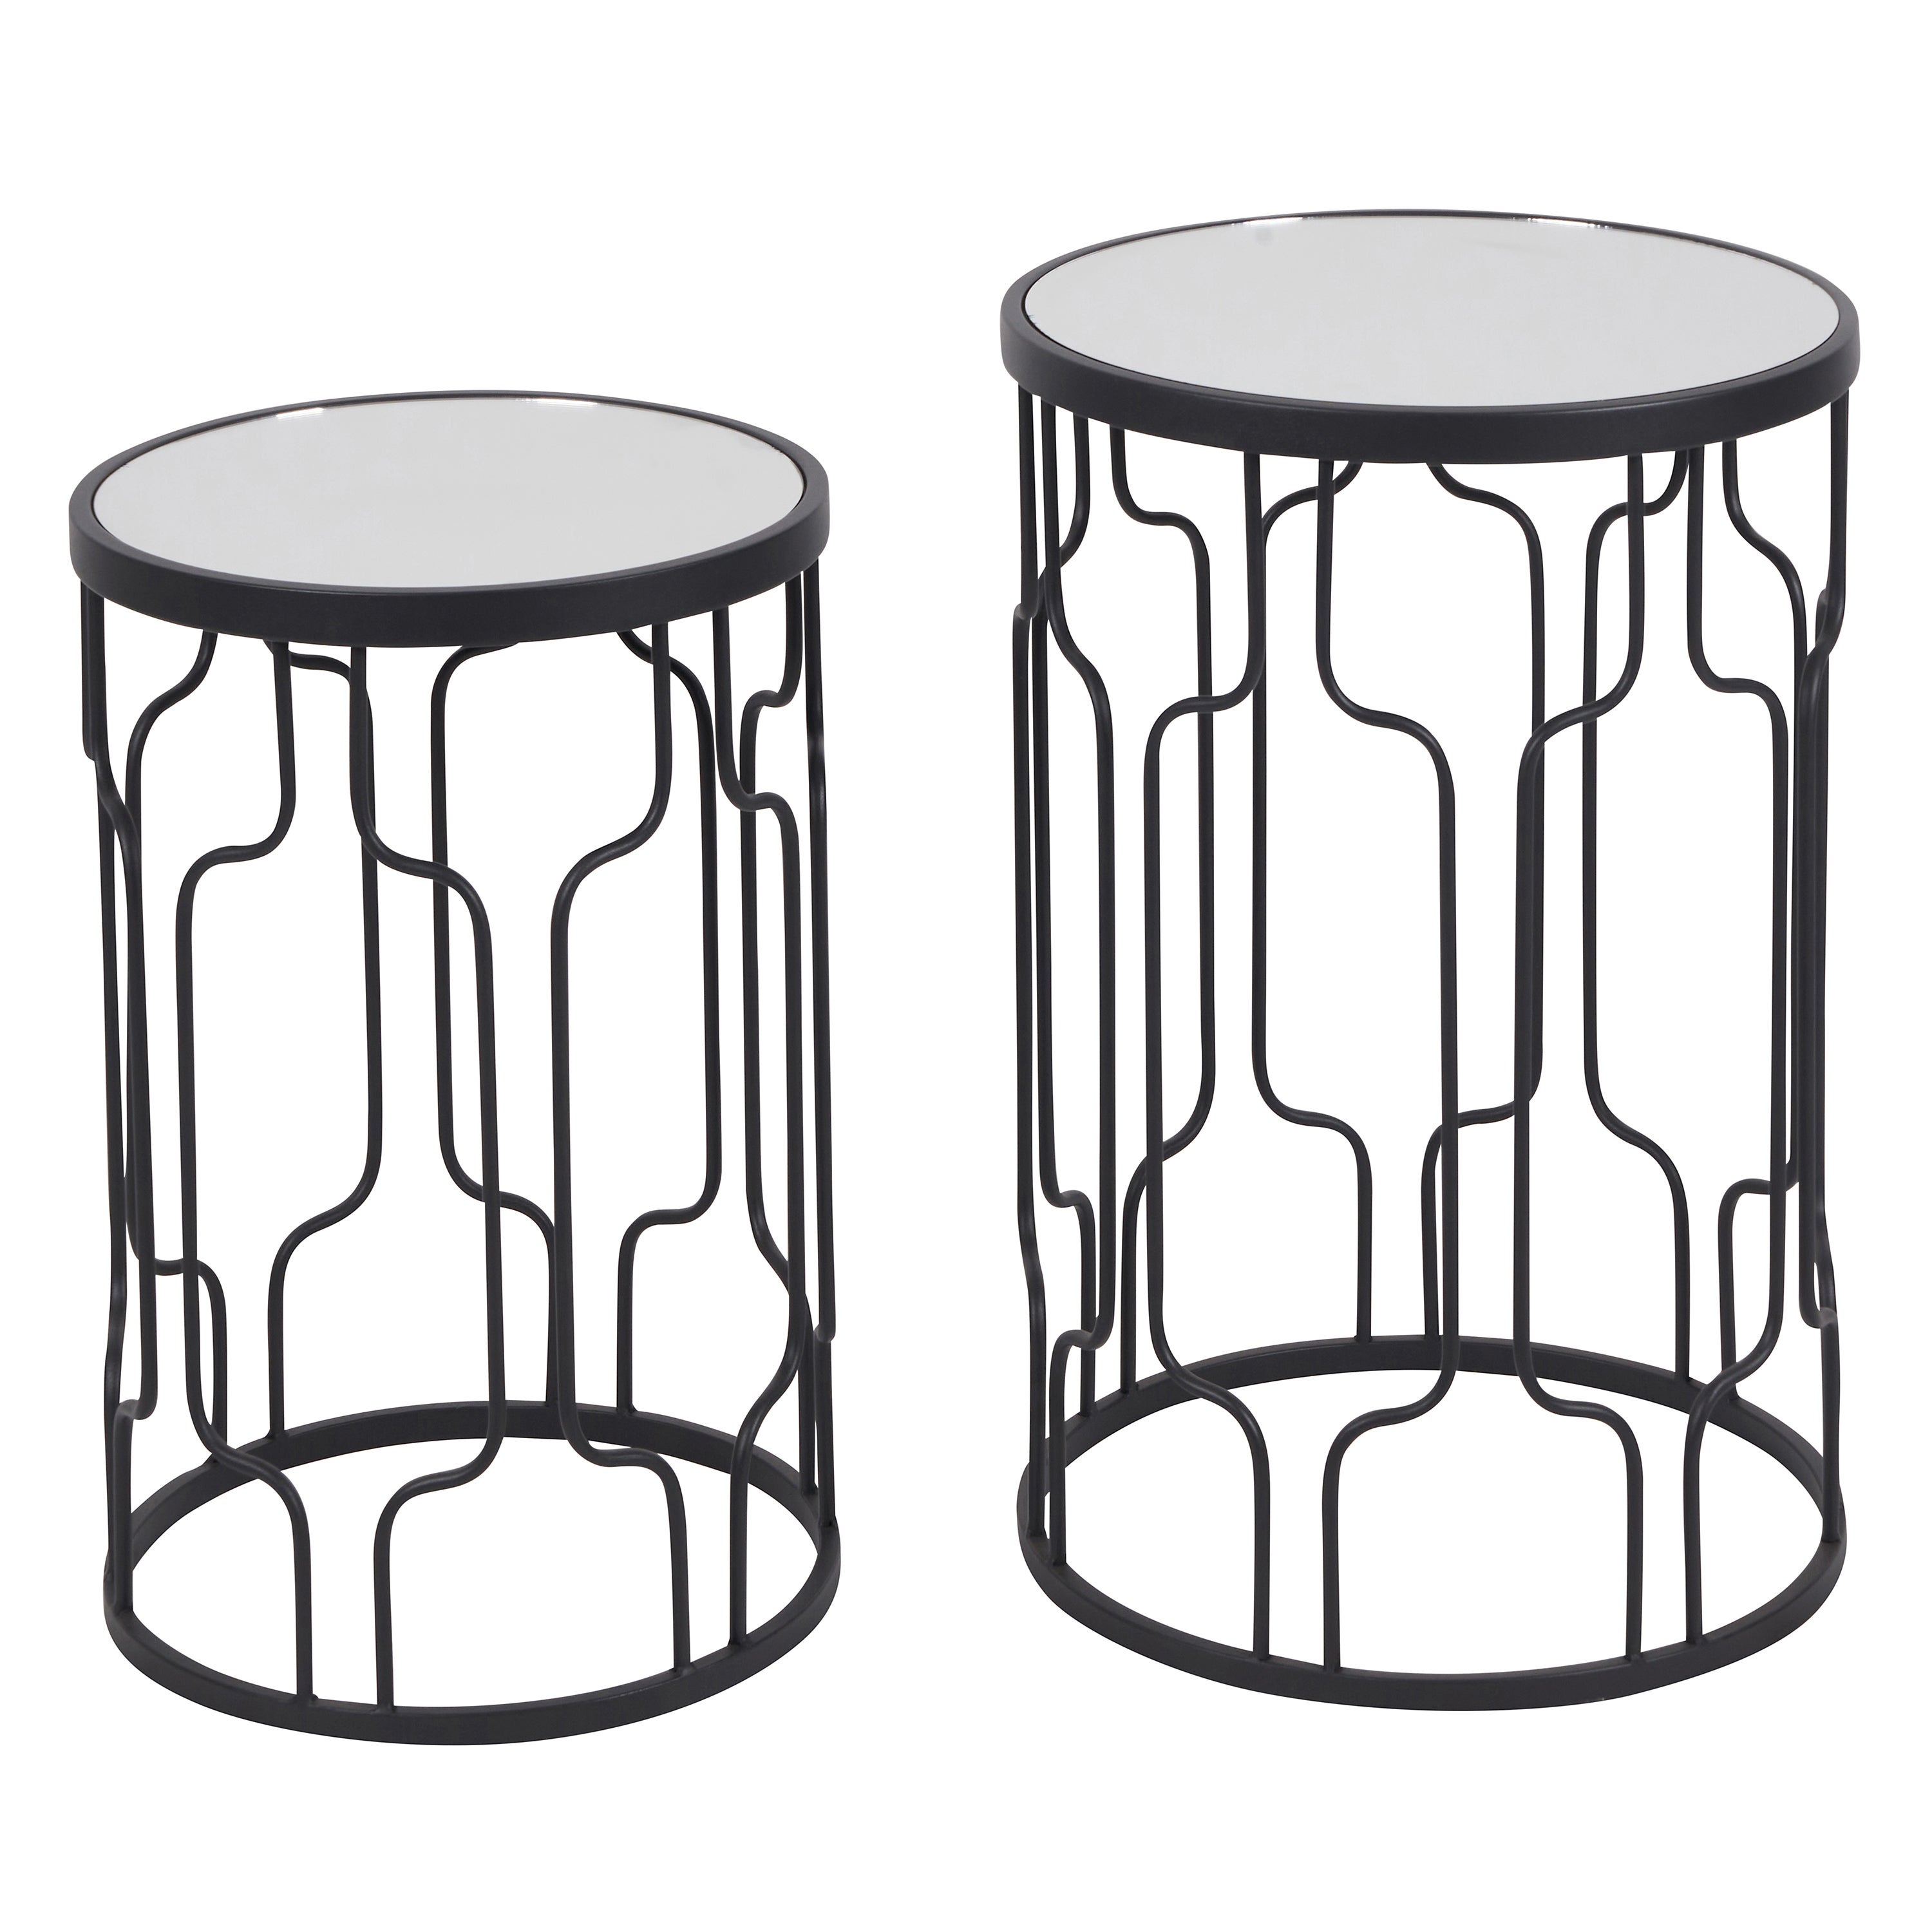 Set Of 2 Caprisse Mirrored Glass Side Tables Black